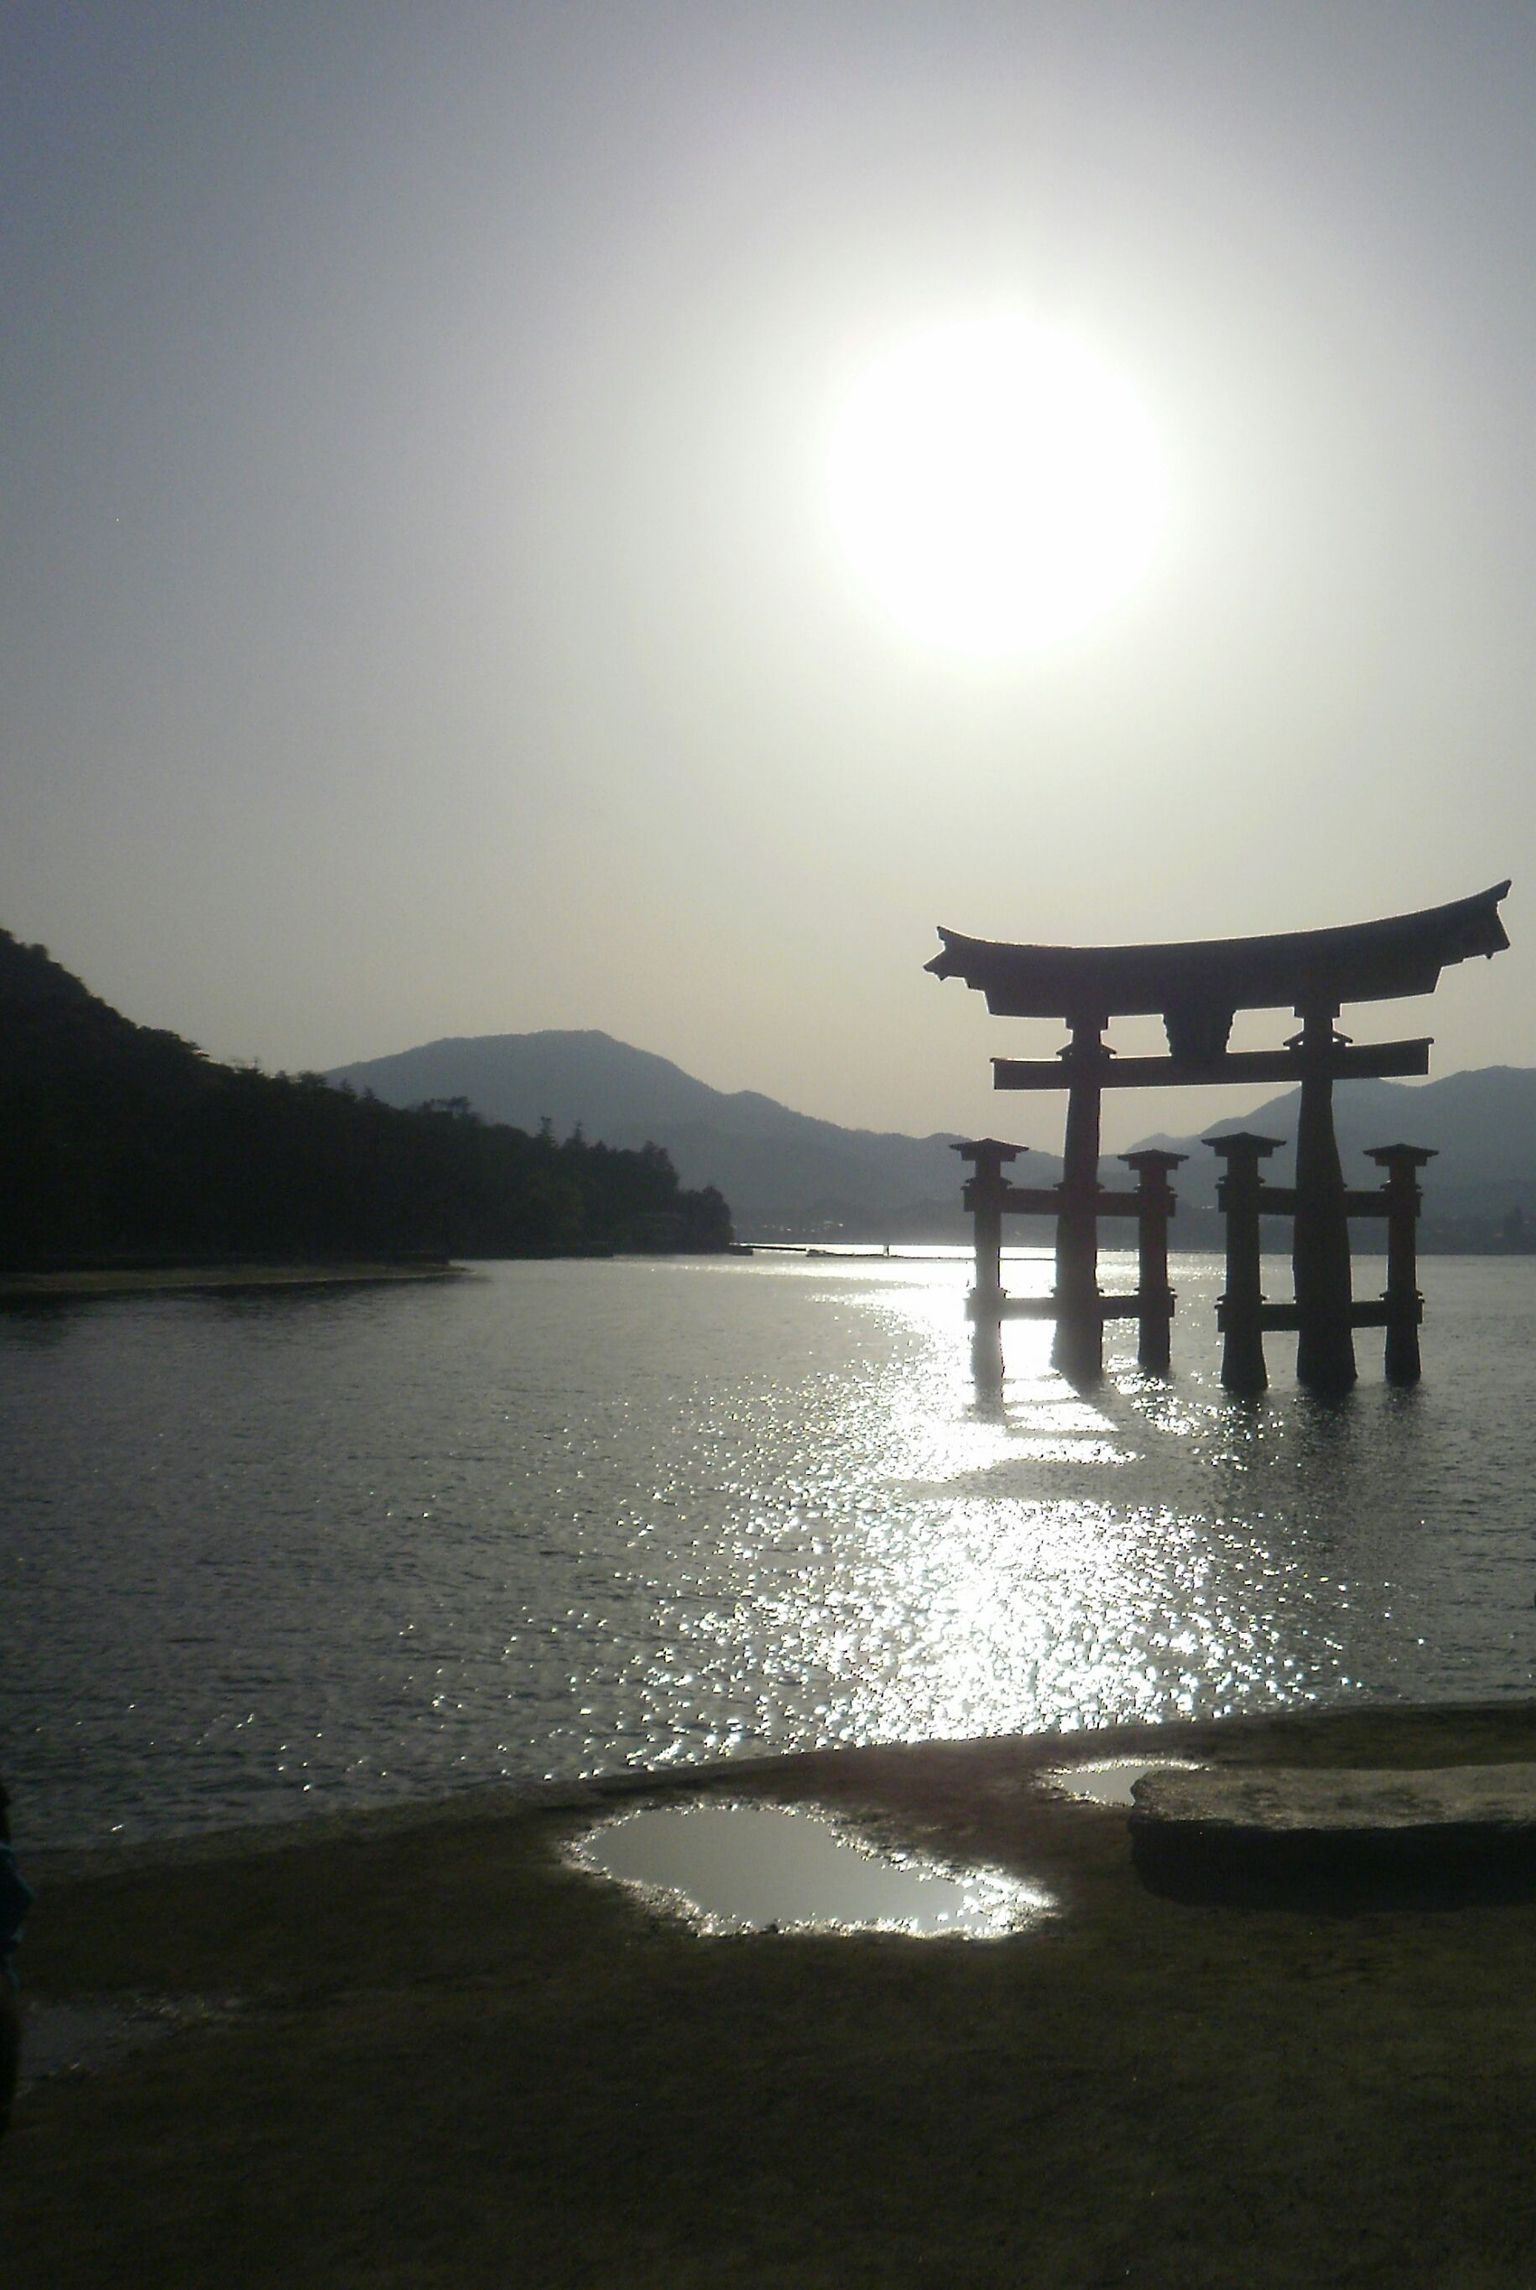 Floating torii gate silouette at sunset